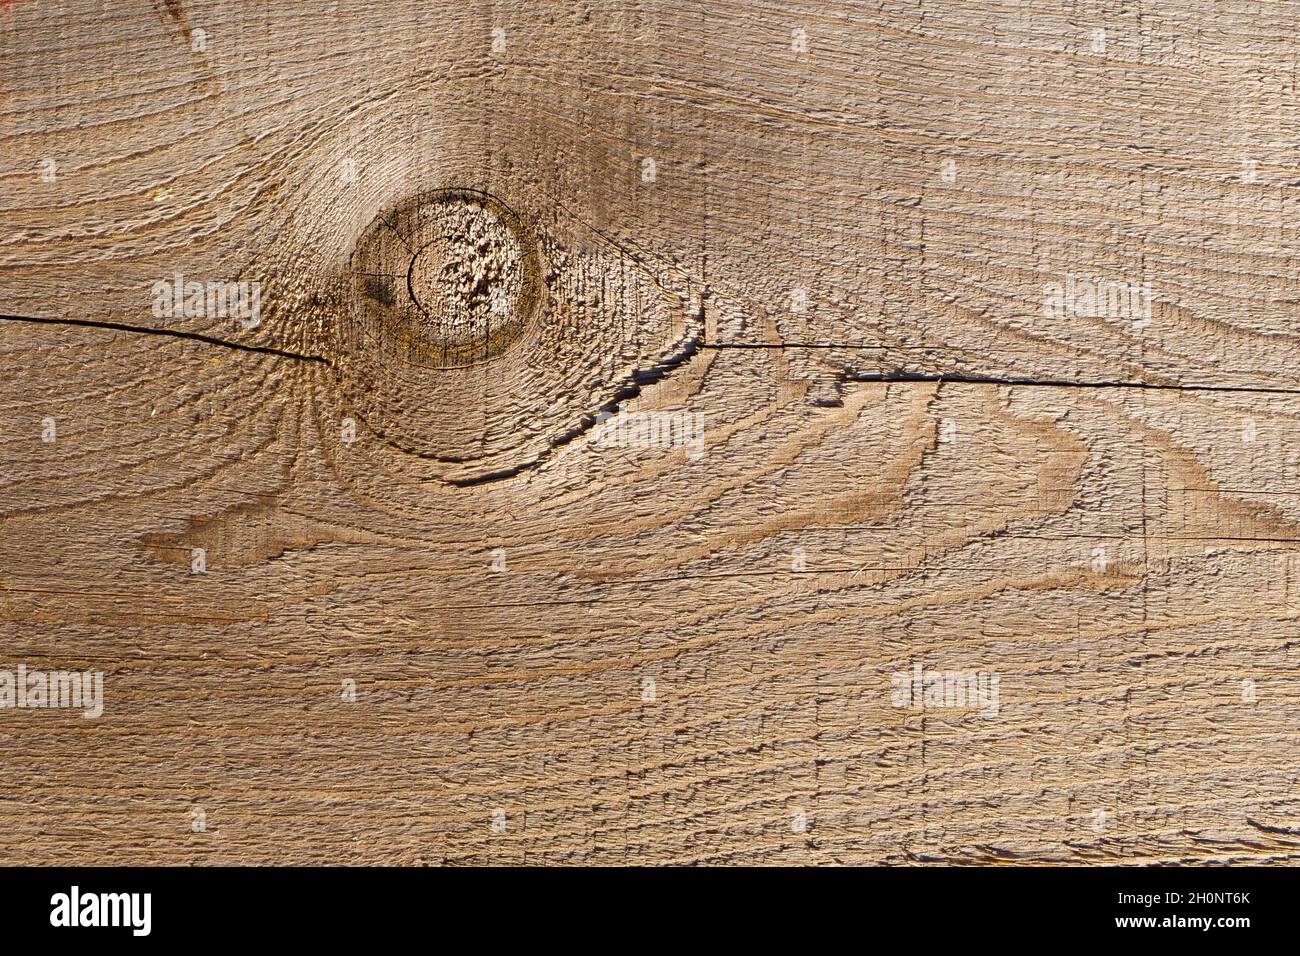 The surface of a rough untreated board with knots and cracks. Texture, background. Stock Photo